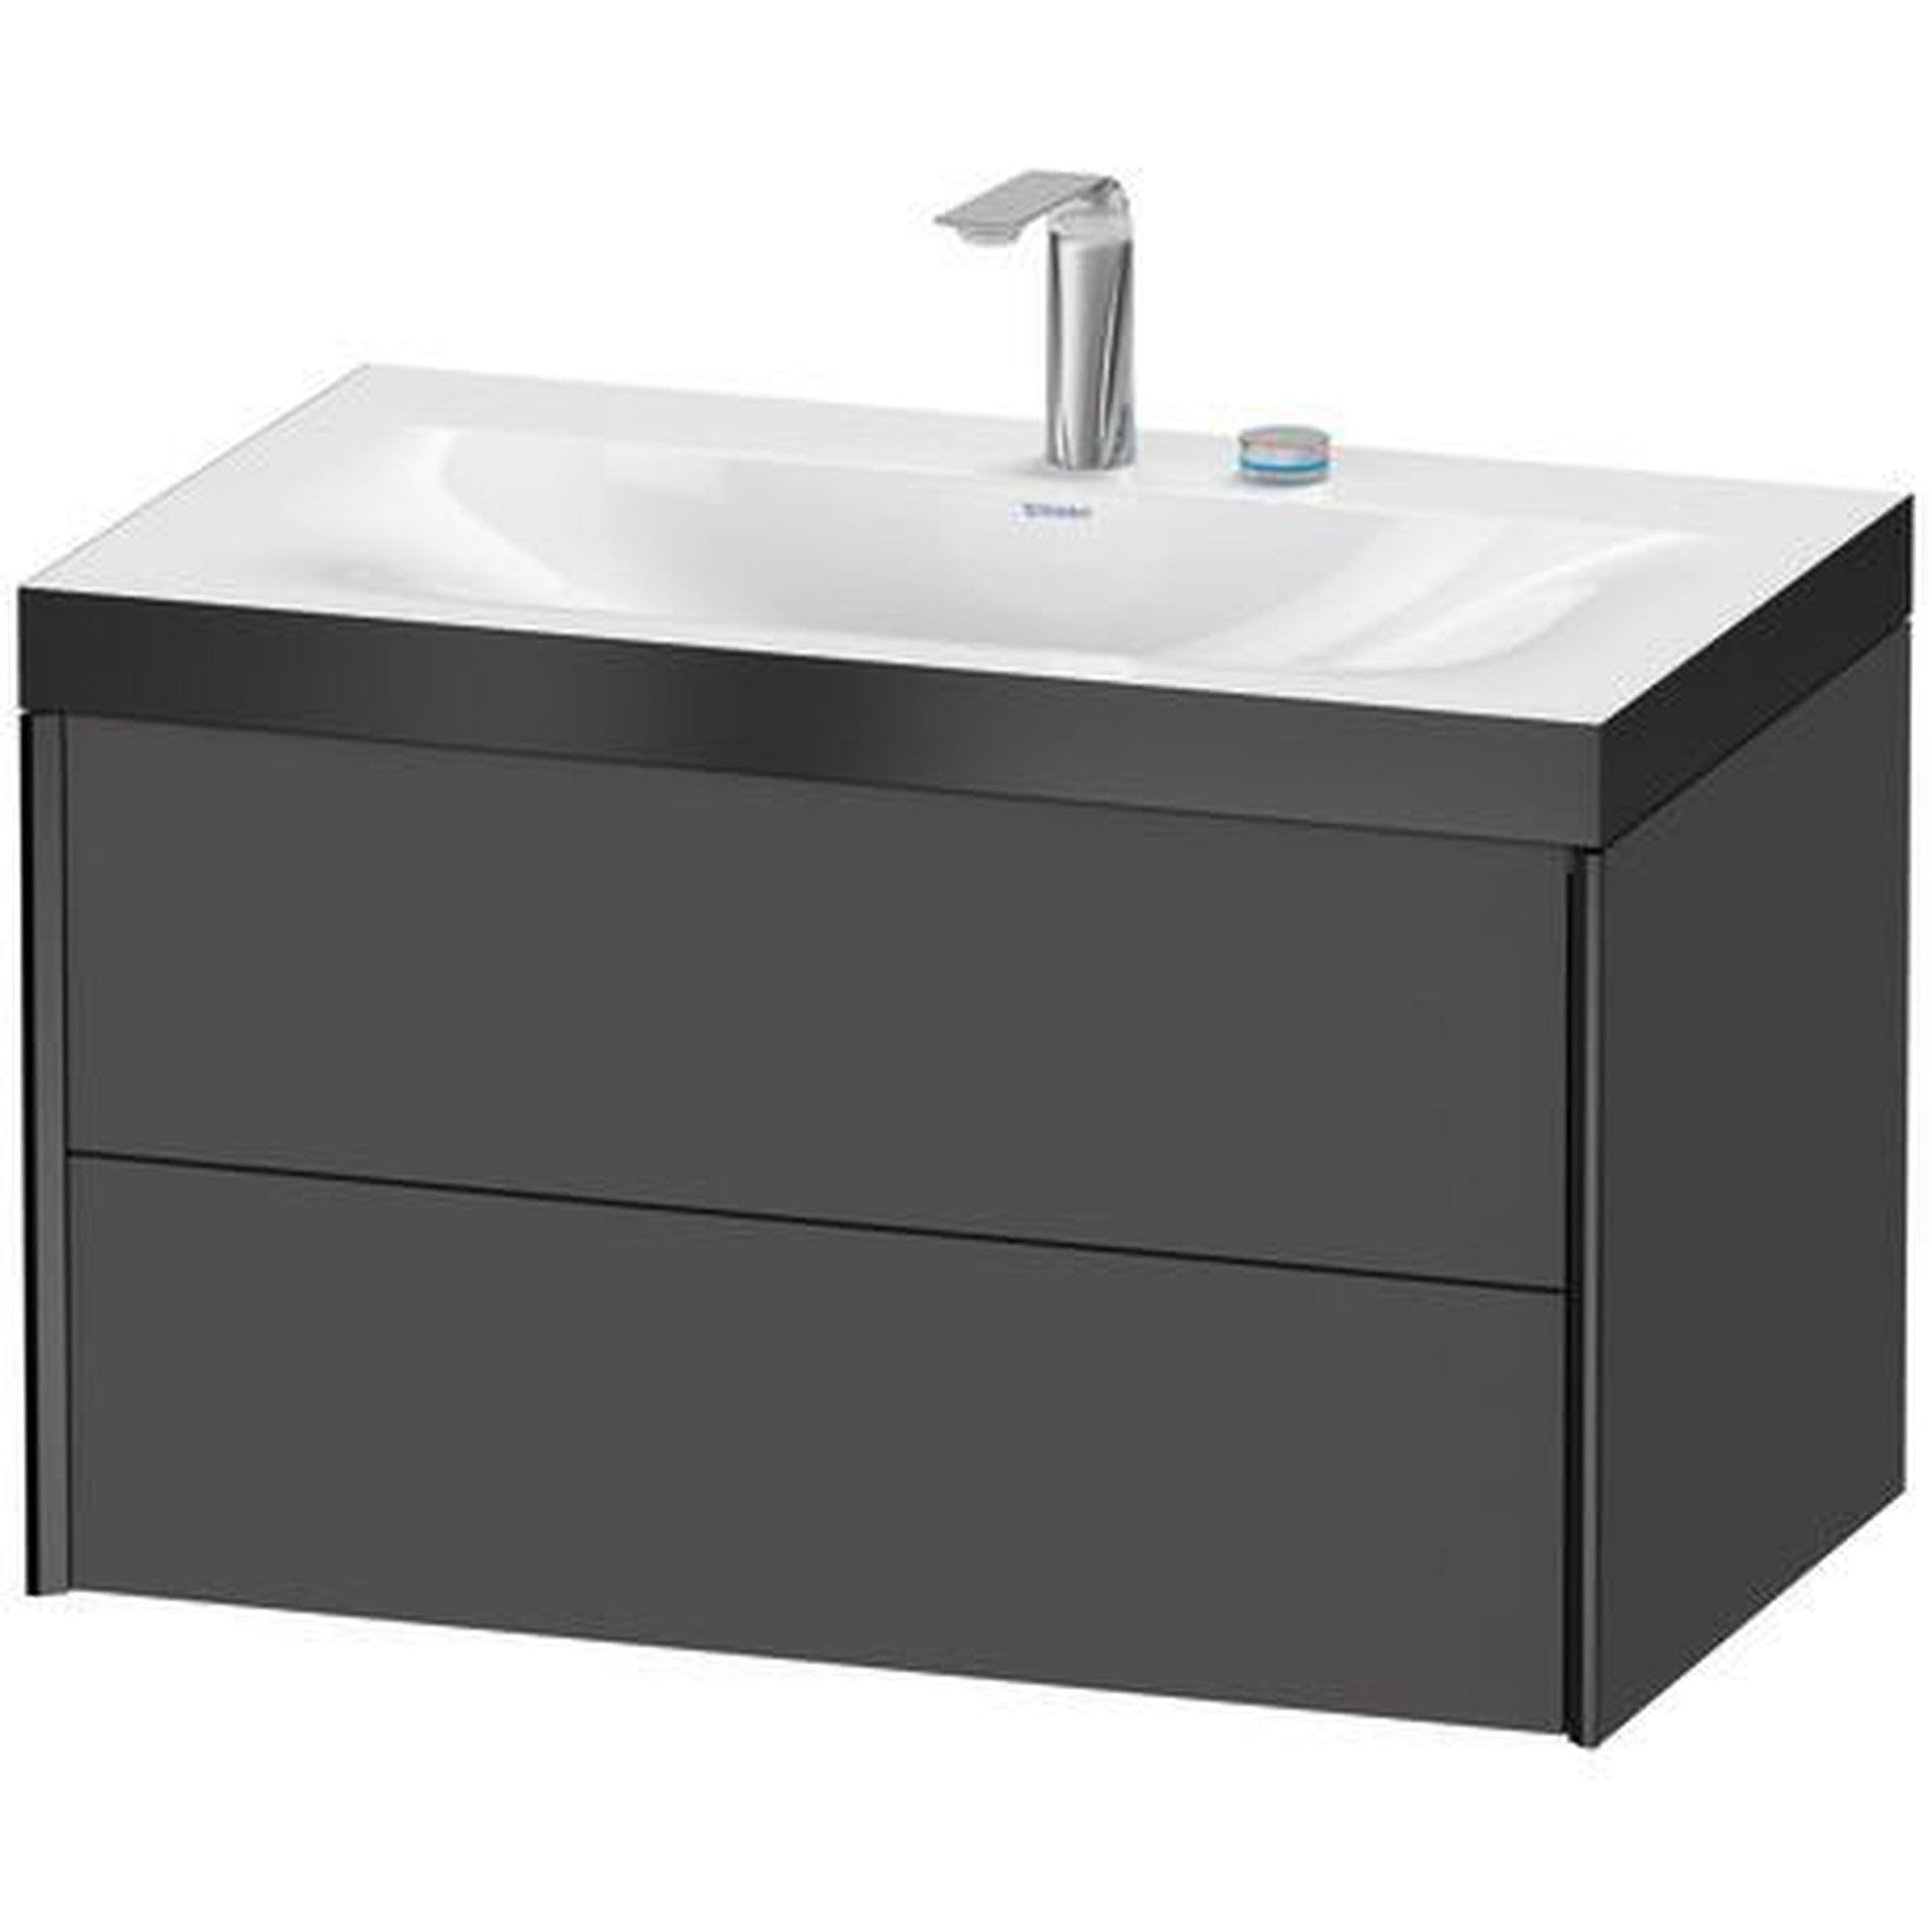 Duravit Xviu 31" x 20" x 19" Two Drawer C-Bonded Wall-Mount Vanity Kit With Two Tap Holes, Graphite (XV4615EB249P)